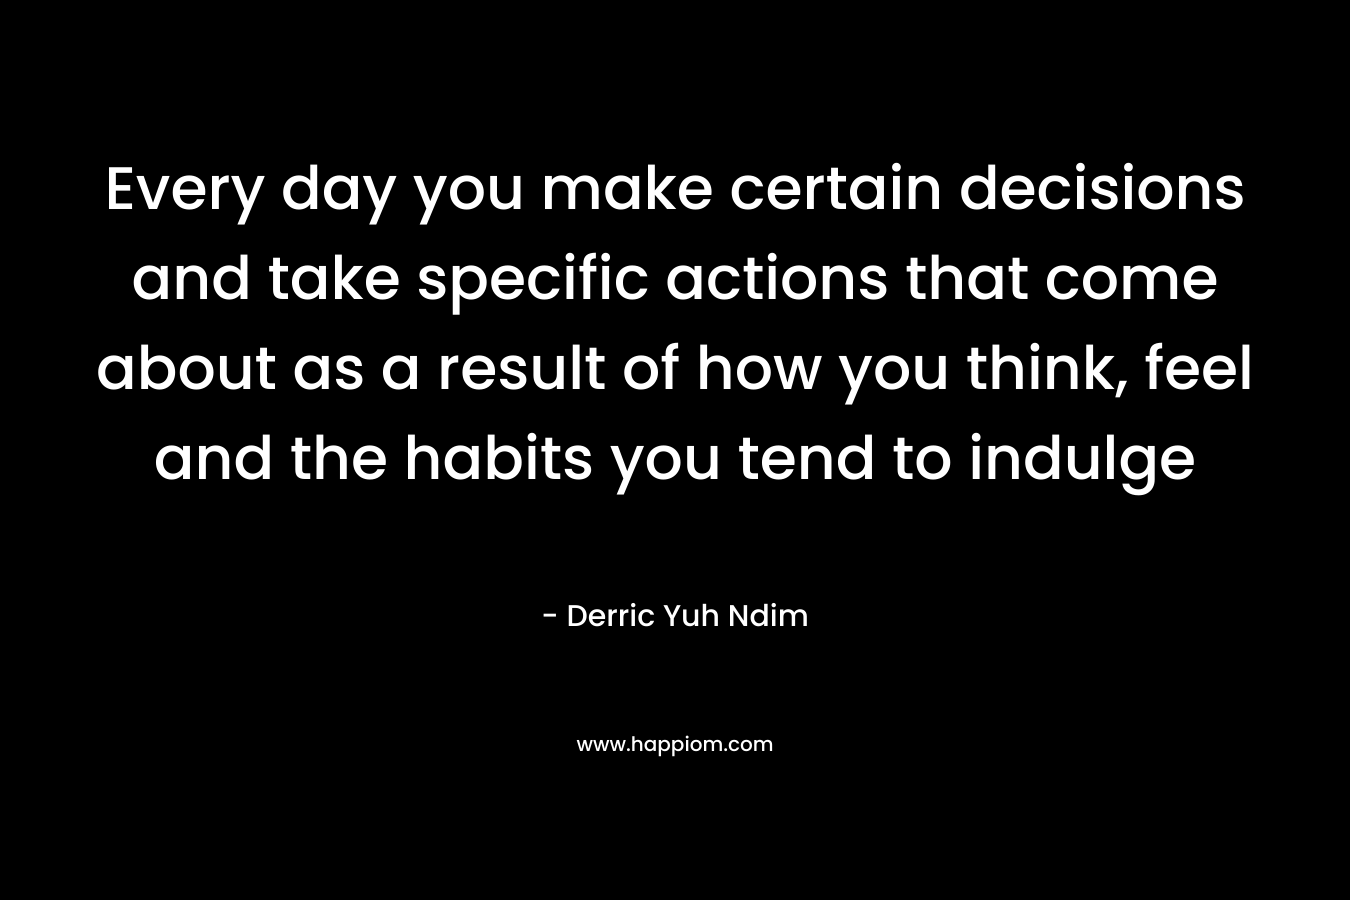 Every day you make certain decisions and take specific actions that come about as a result of how you think, feel and the habits you tend to indulge